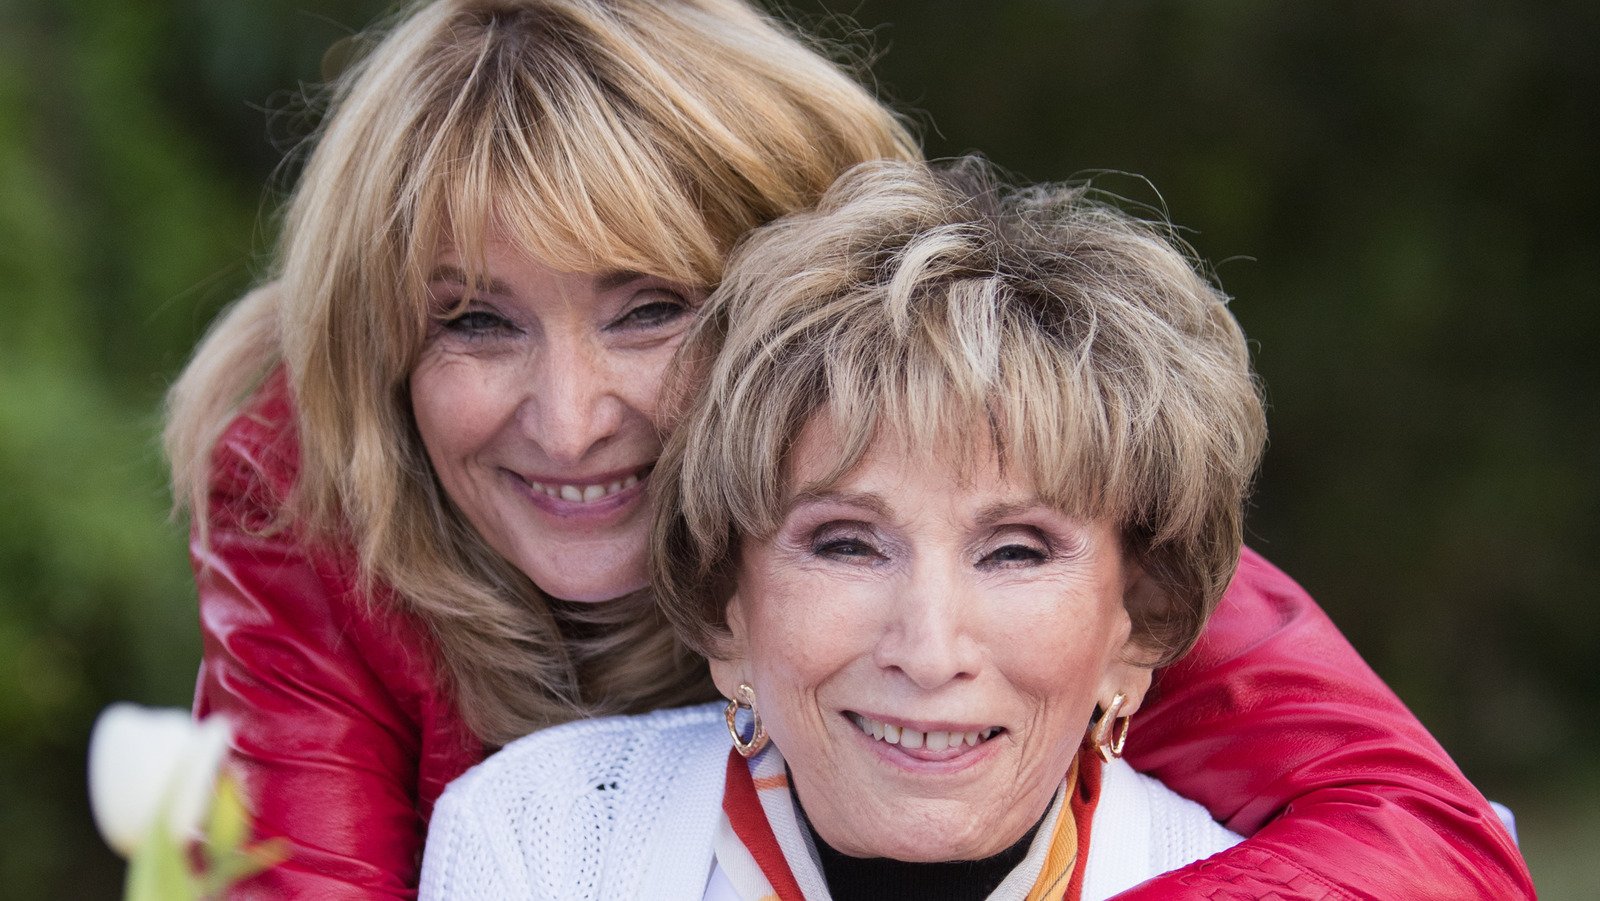 Dr. Edith Eger On Breaking Free From A Traumatic Past – Exclusive